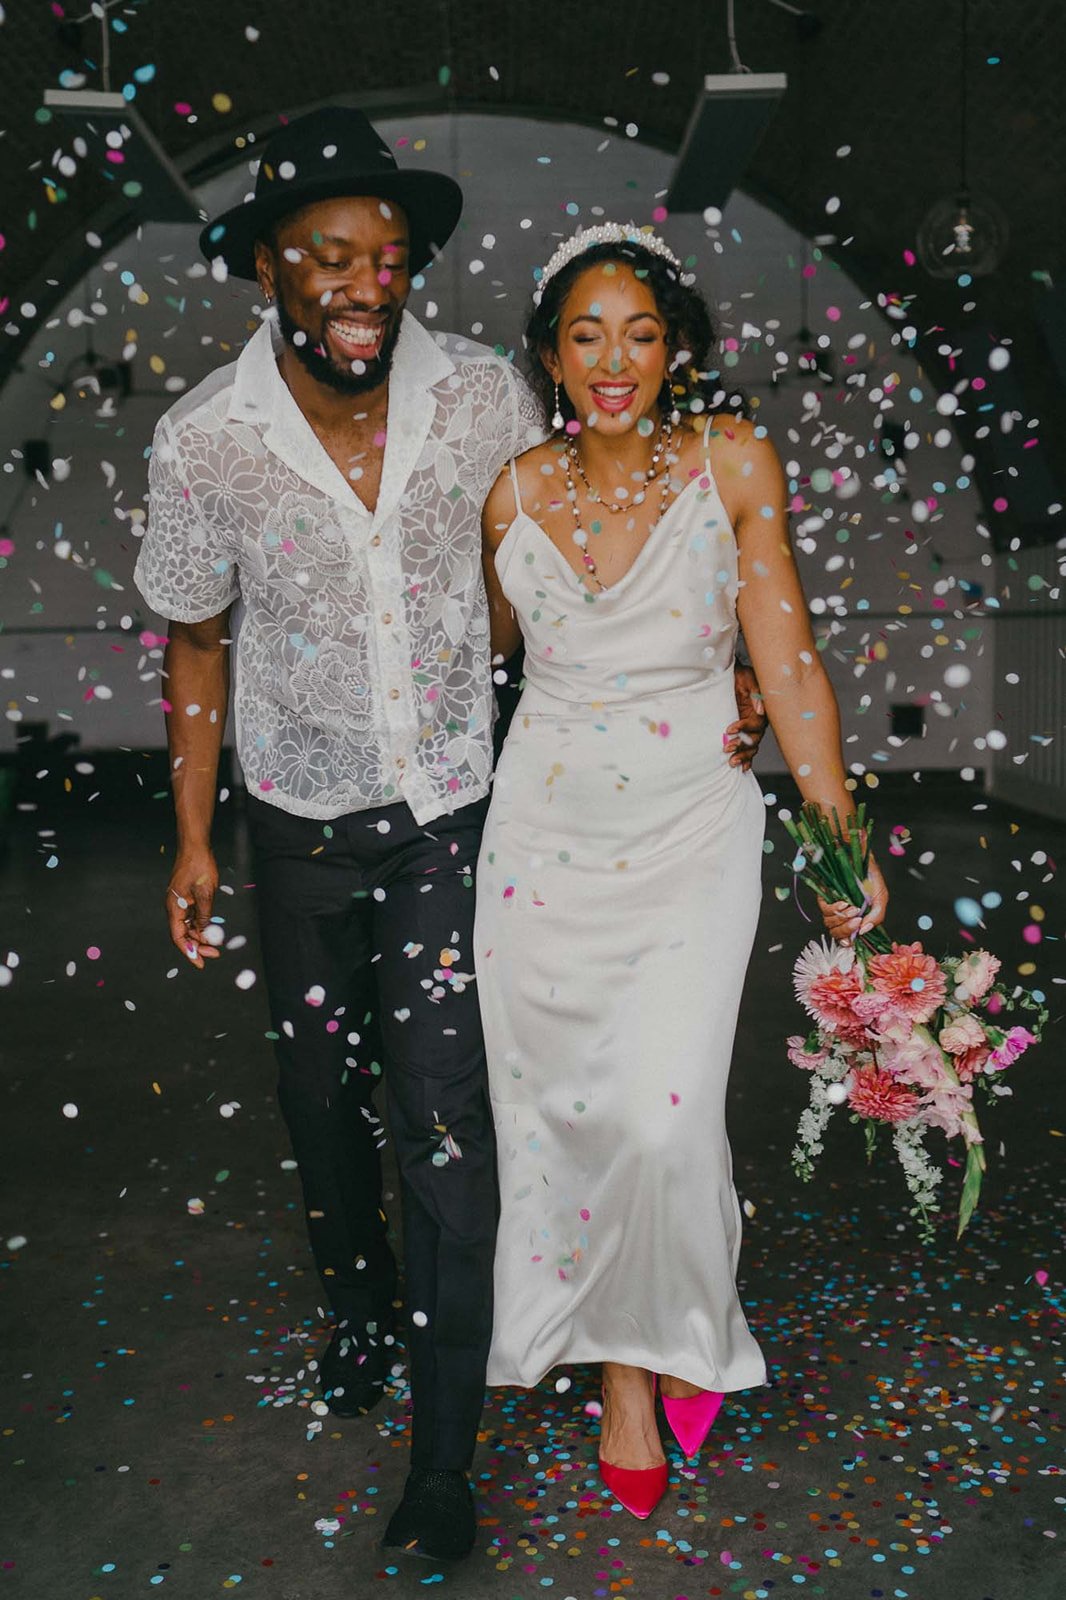  An image captured of newlyweds as their wedding guests cover them in confetti.  Photo by: Josephine Elvis 